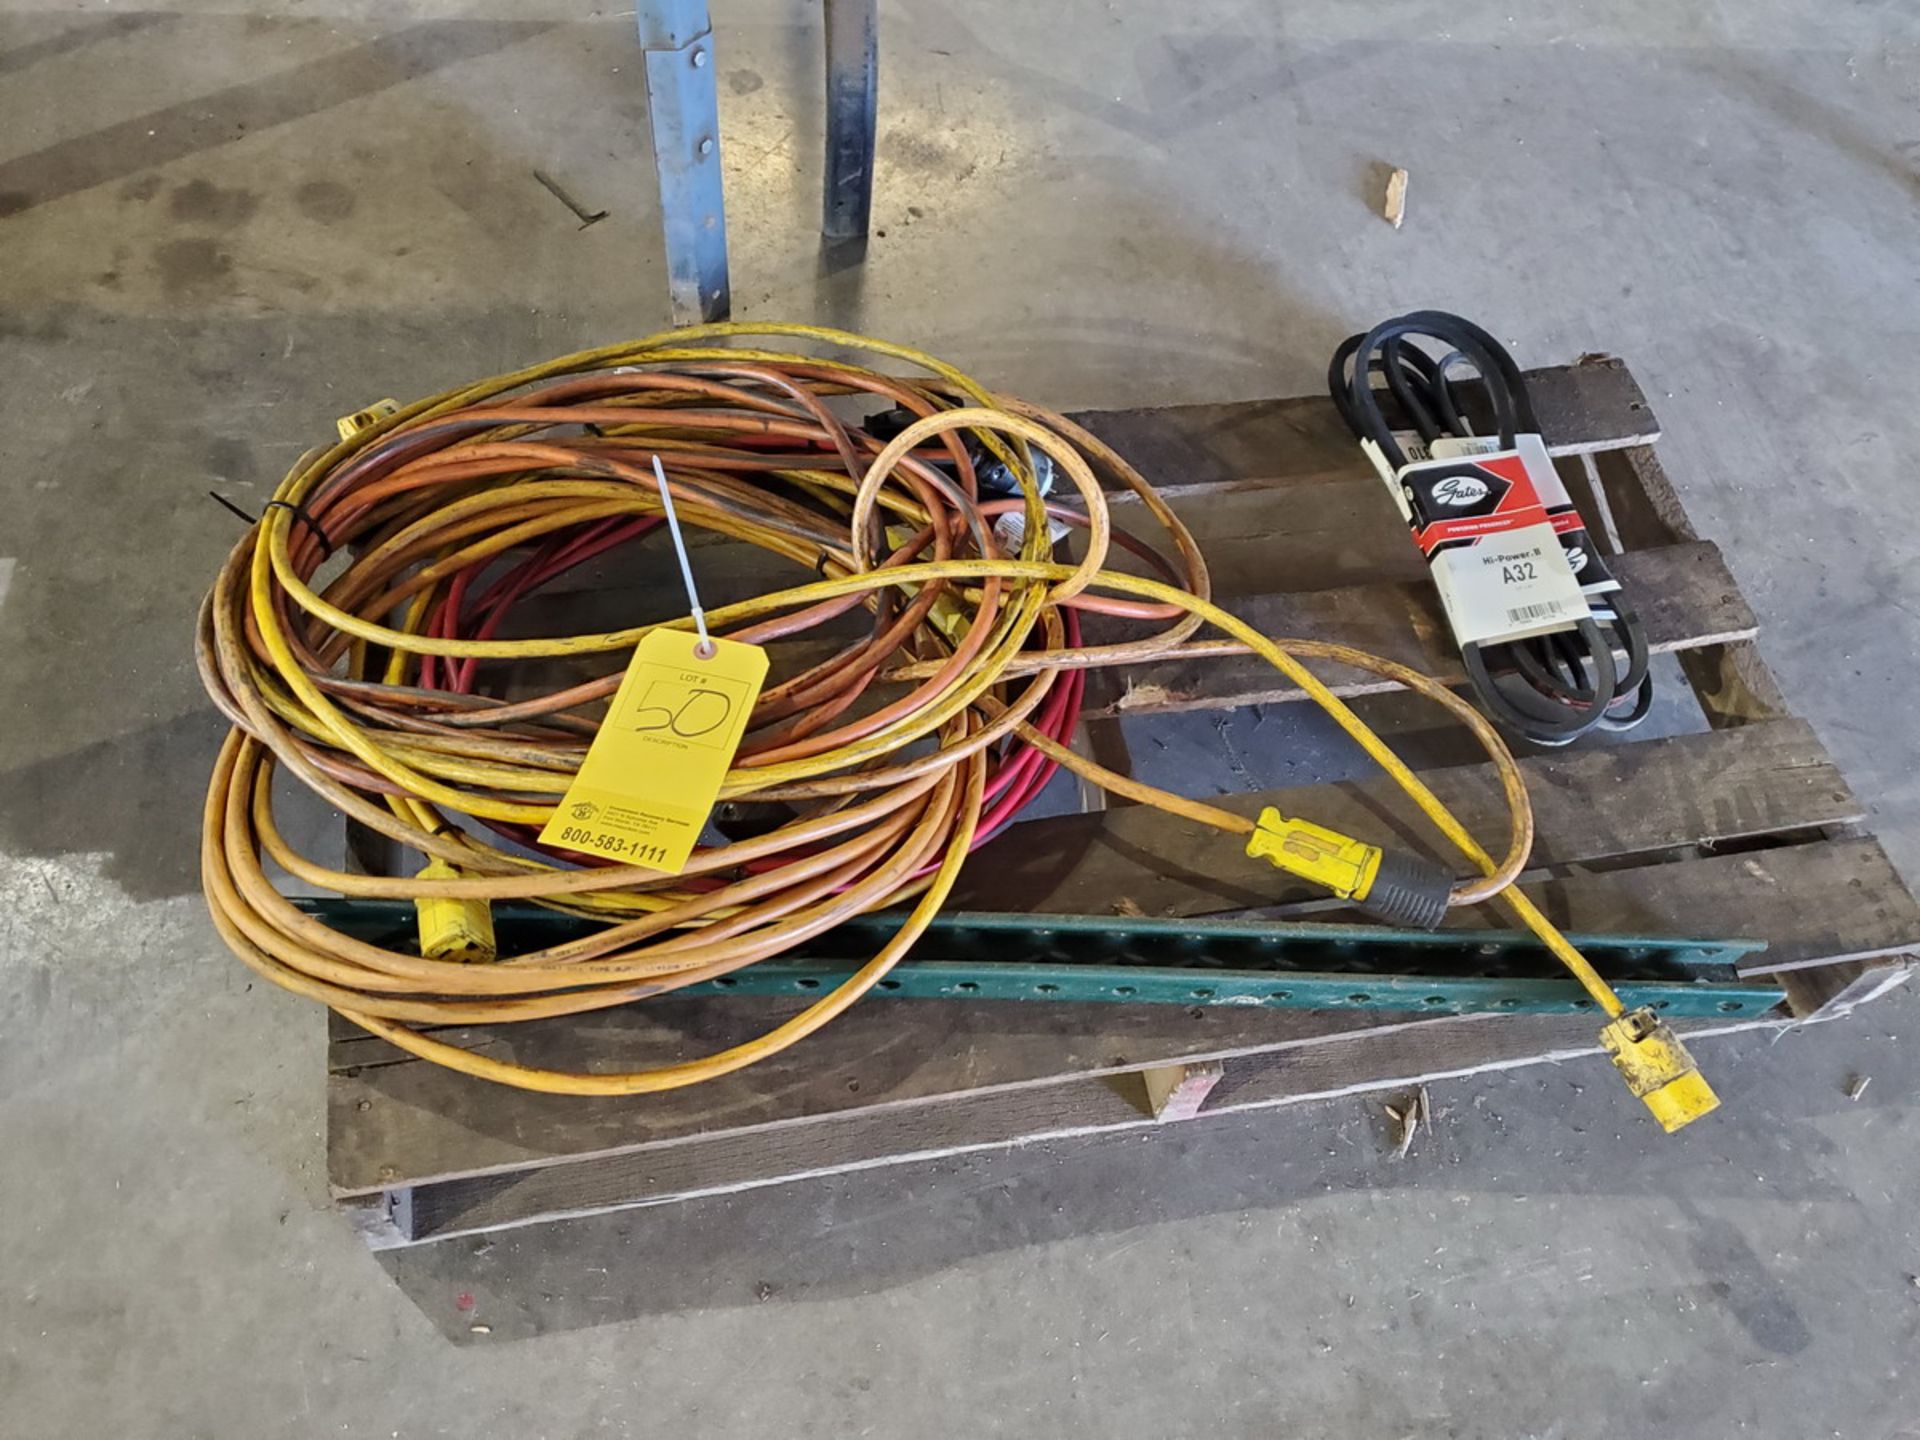 Assorted Material To Include But Not Limited To: Air Hoses, Extension Cords, Belts, etc. - Image 9 of 10